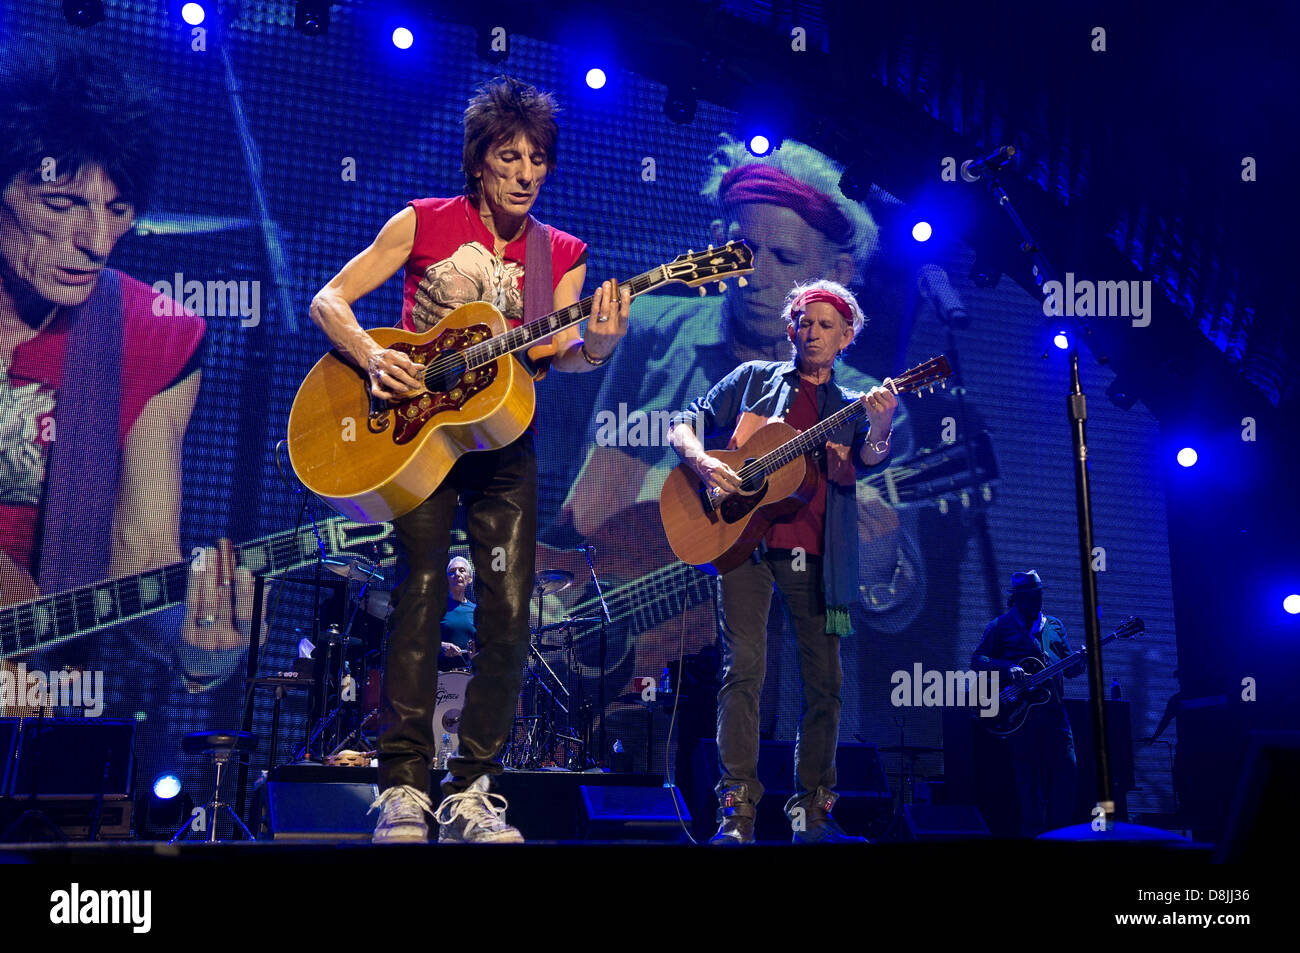 The Rolling Stones perform during their '50 and Counting' tour in Toronto, Ontario, Canada. 05.25.13 Air Canada Centre Stock Photo